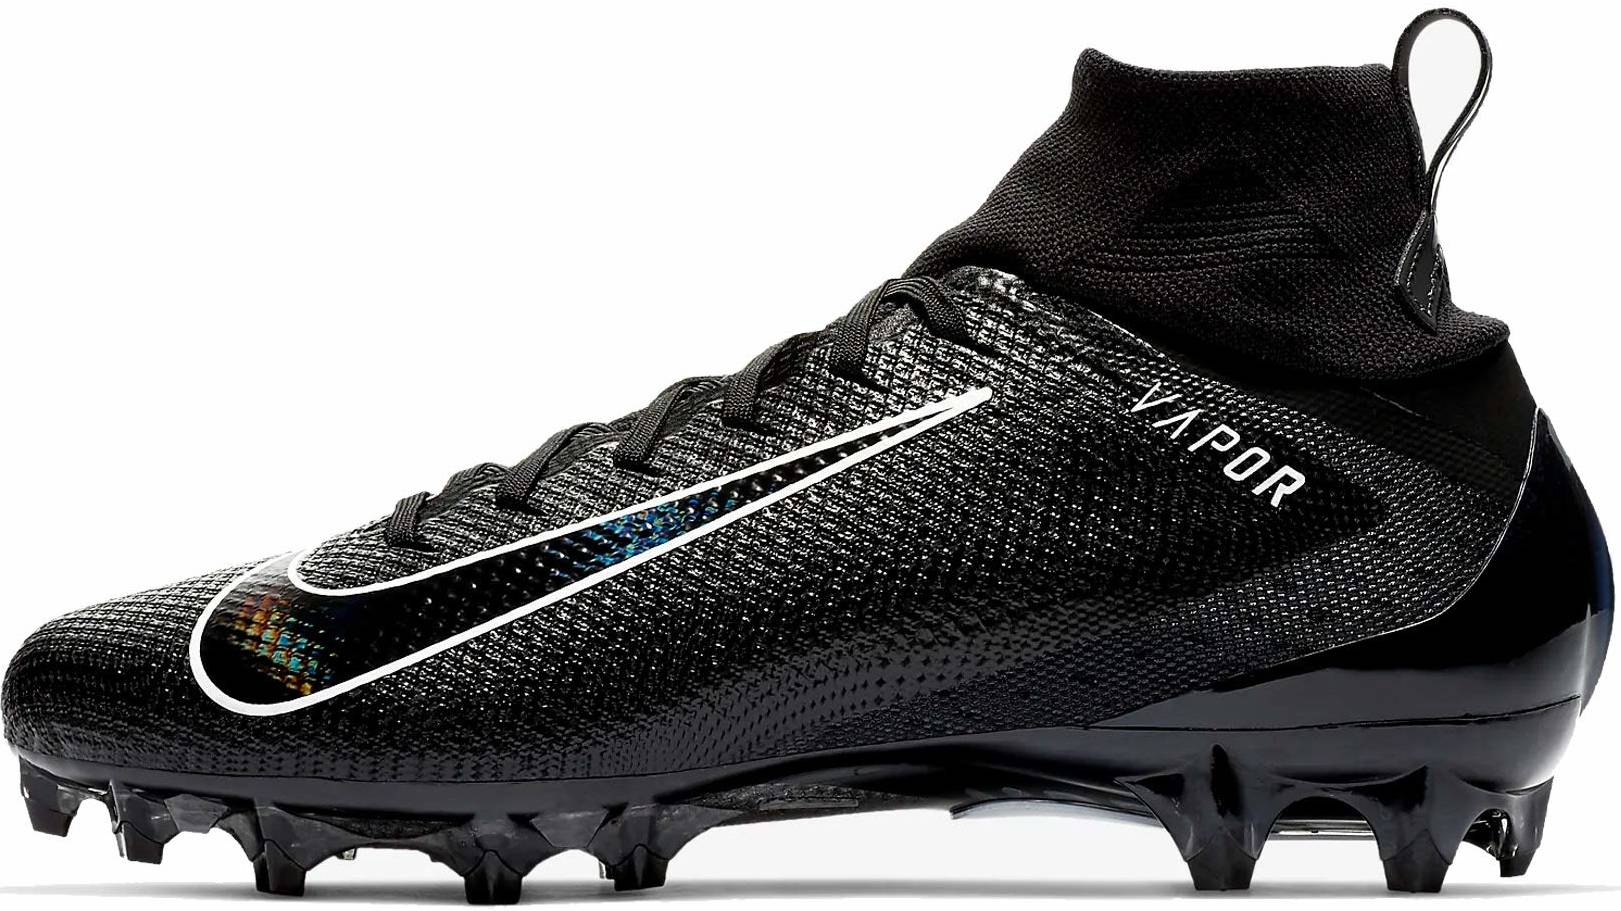 Save 68% on Football Cleats (41 Models 